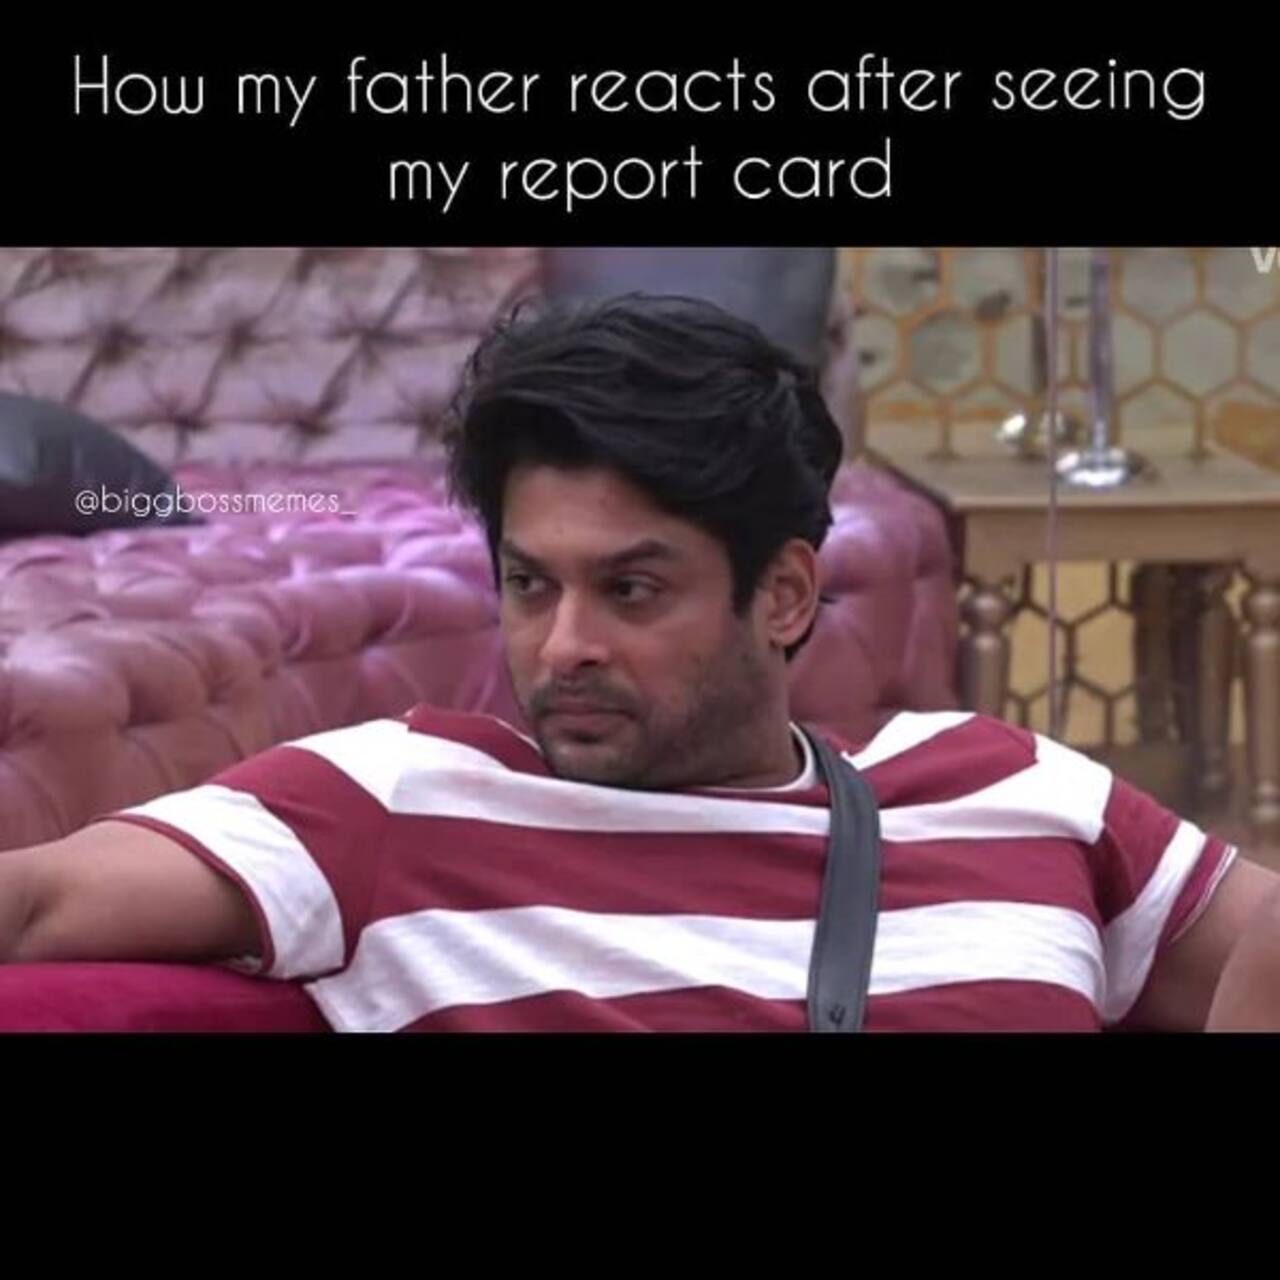 fire gange dagbog Konflikt Monday Memes: This whole set of Bigg Boss 13 memes ft. Sidharth Shukla and  Shehnaaz Gill is too funny to miss